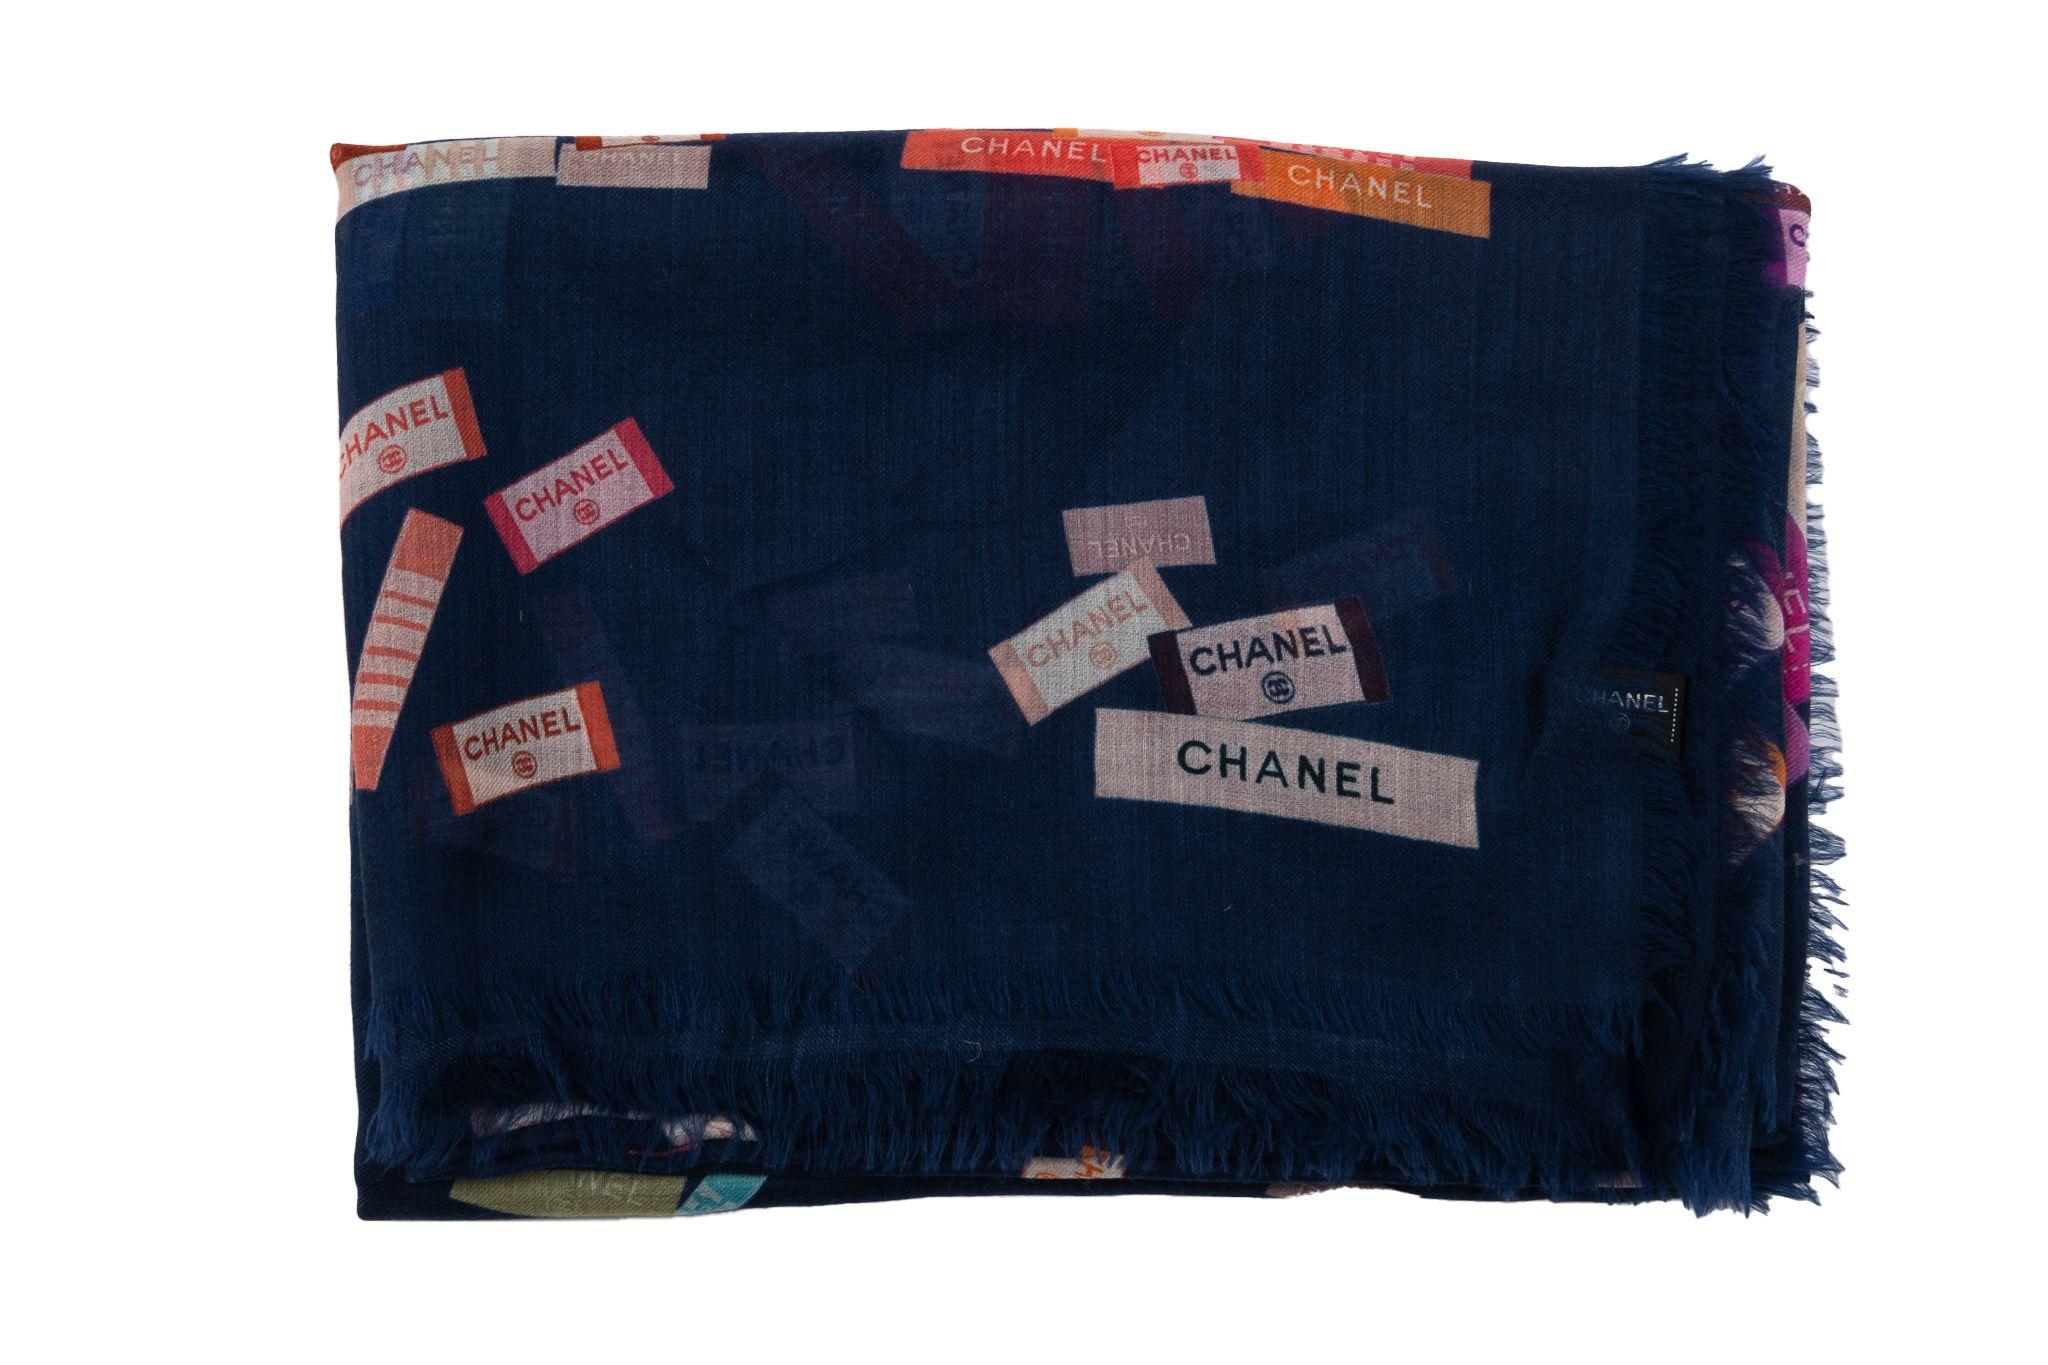 Chanel new navy cashmere shawl with multicolor labels design. Very light and delicate. Care tag.